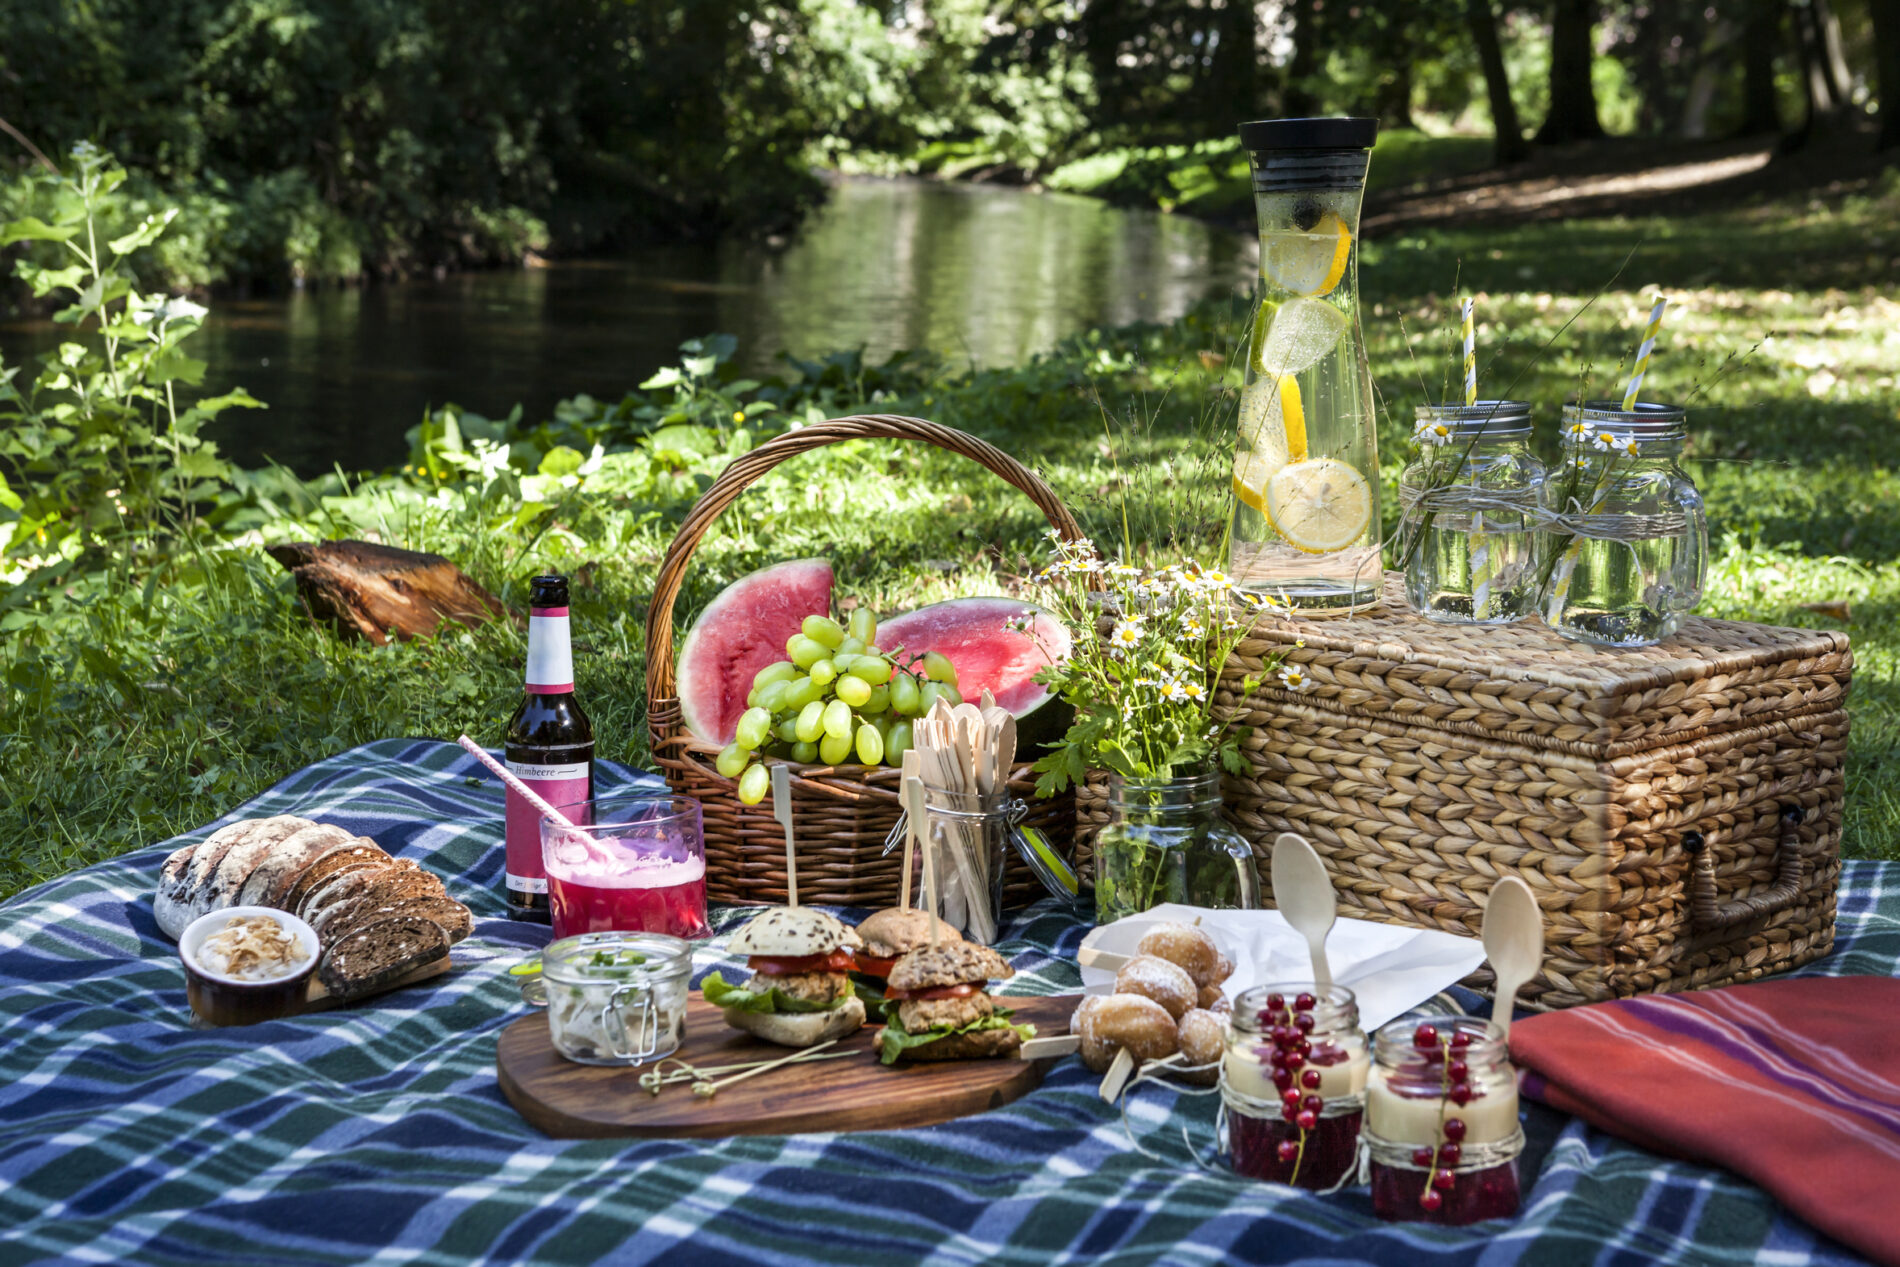 Picnic arrangement on a blu blanket with a lake in the background